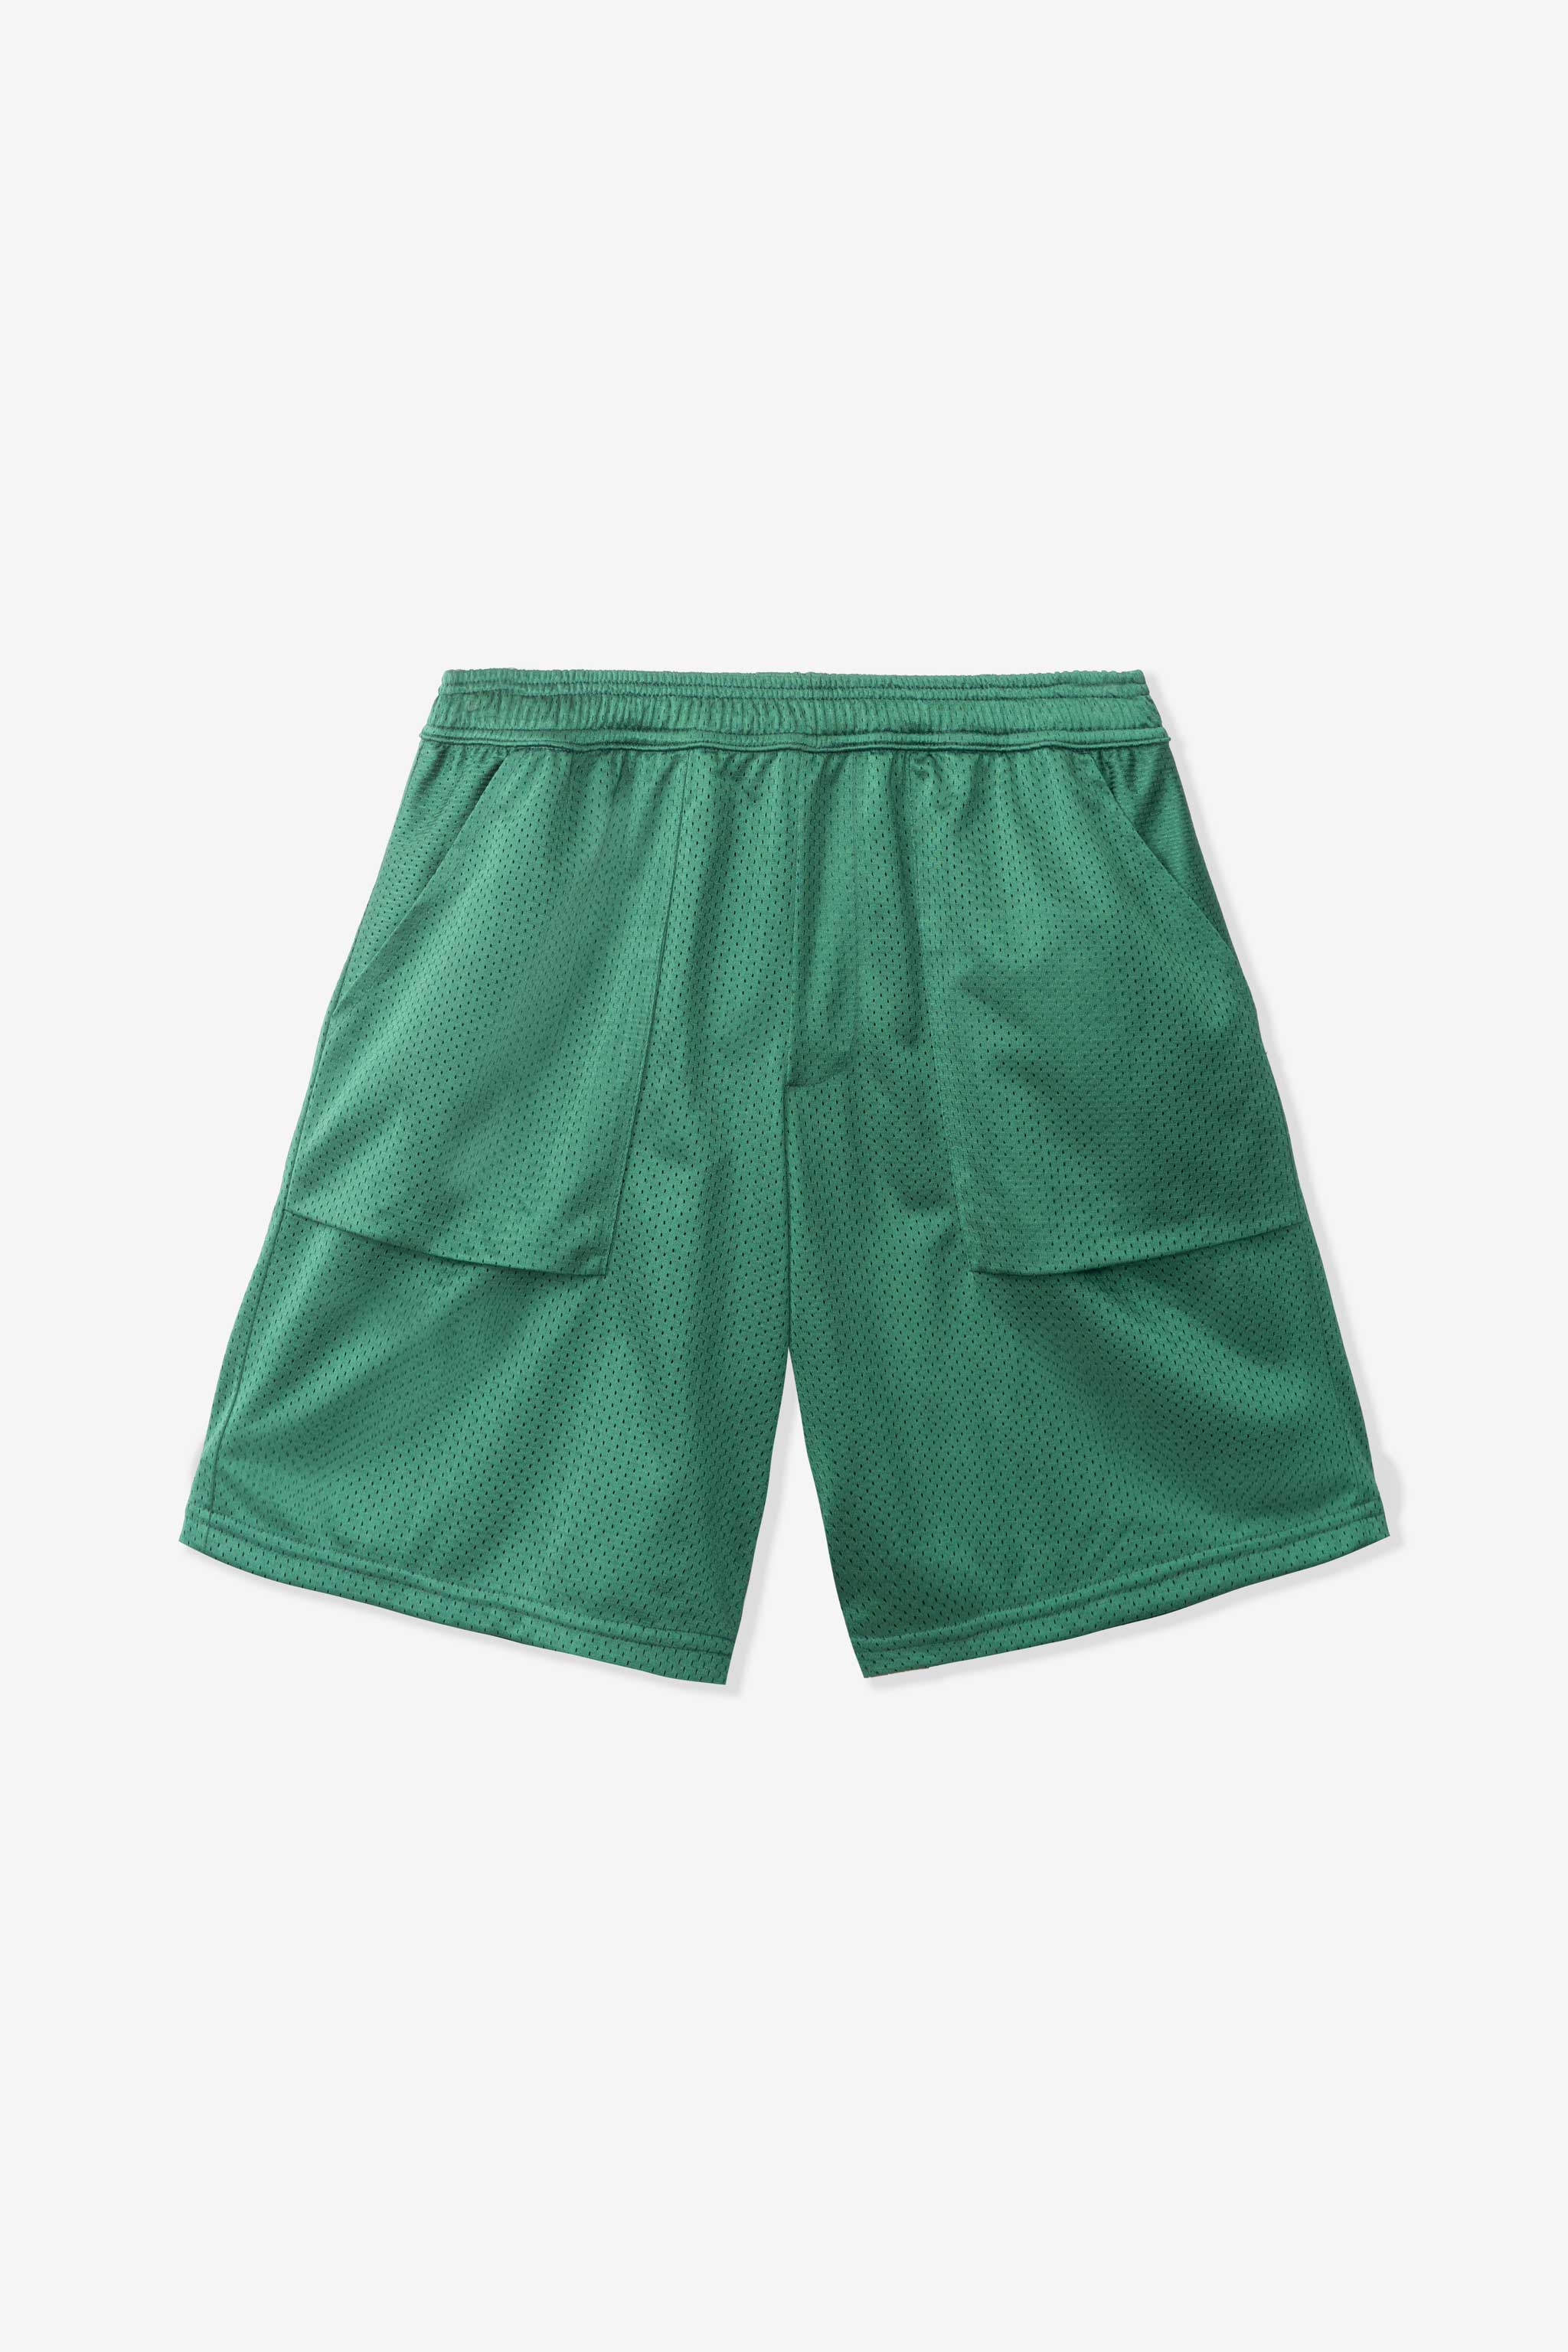 Grocery Getter Shorts – Goodfight